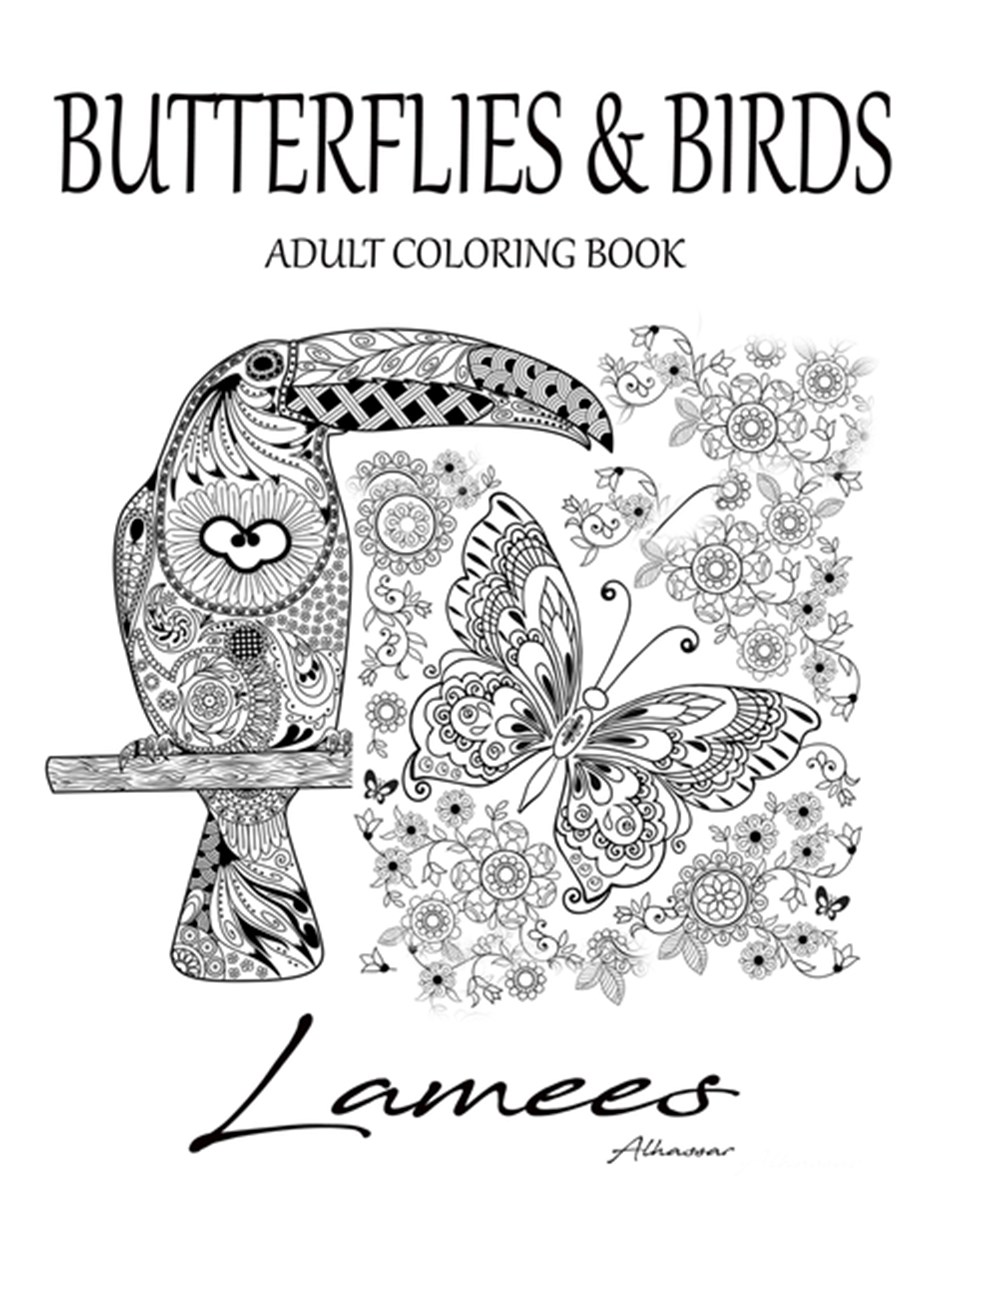 Download Butterflies Birds In Paperback By Lamees Alhassar